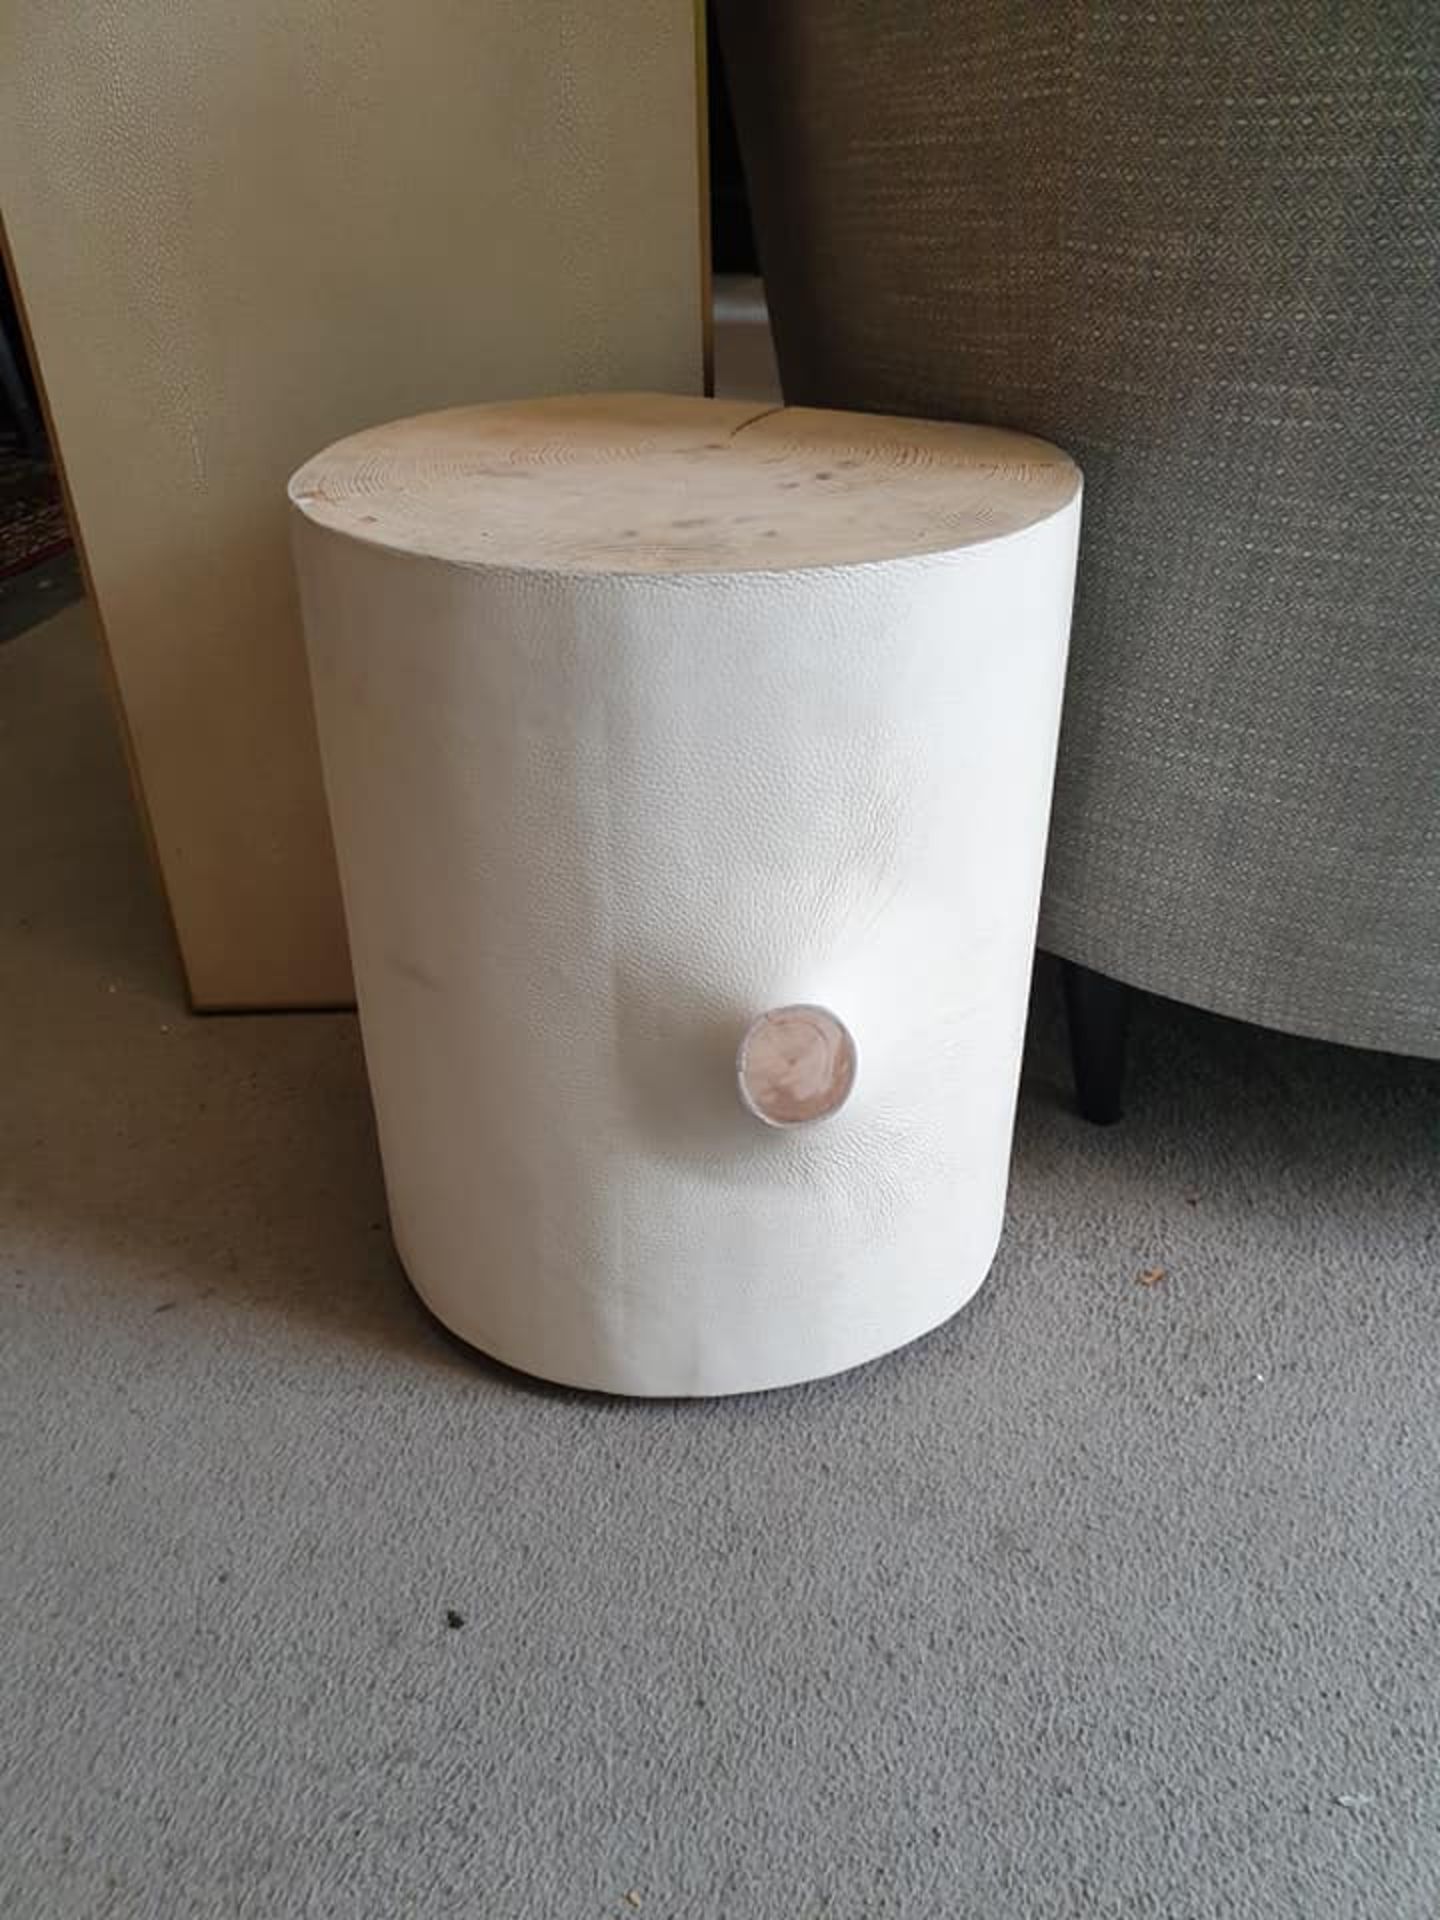 Bleu Nature Logglove Occasional Table/Stool Resinous Wood With White Pebble Leather 32 x 37 x 45cm - Image 2 of 2